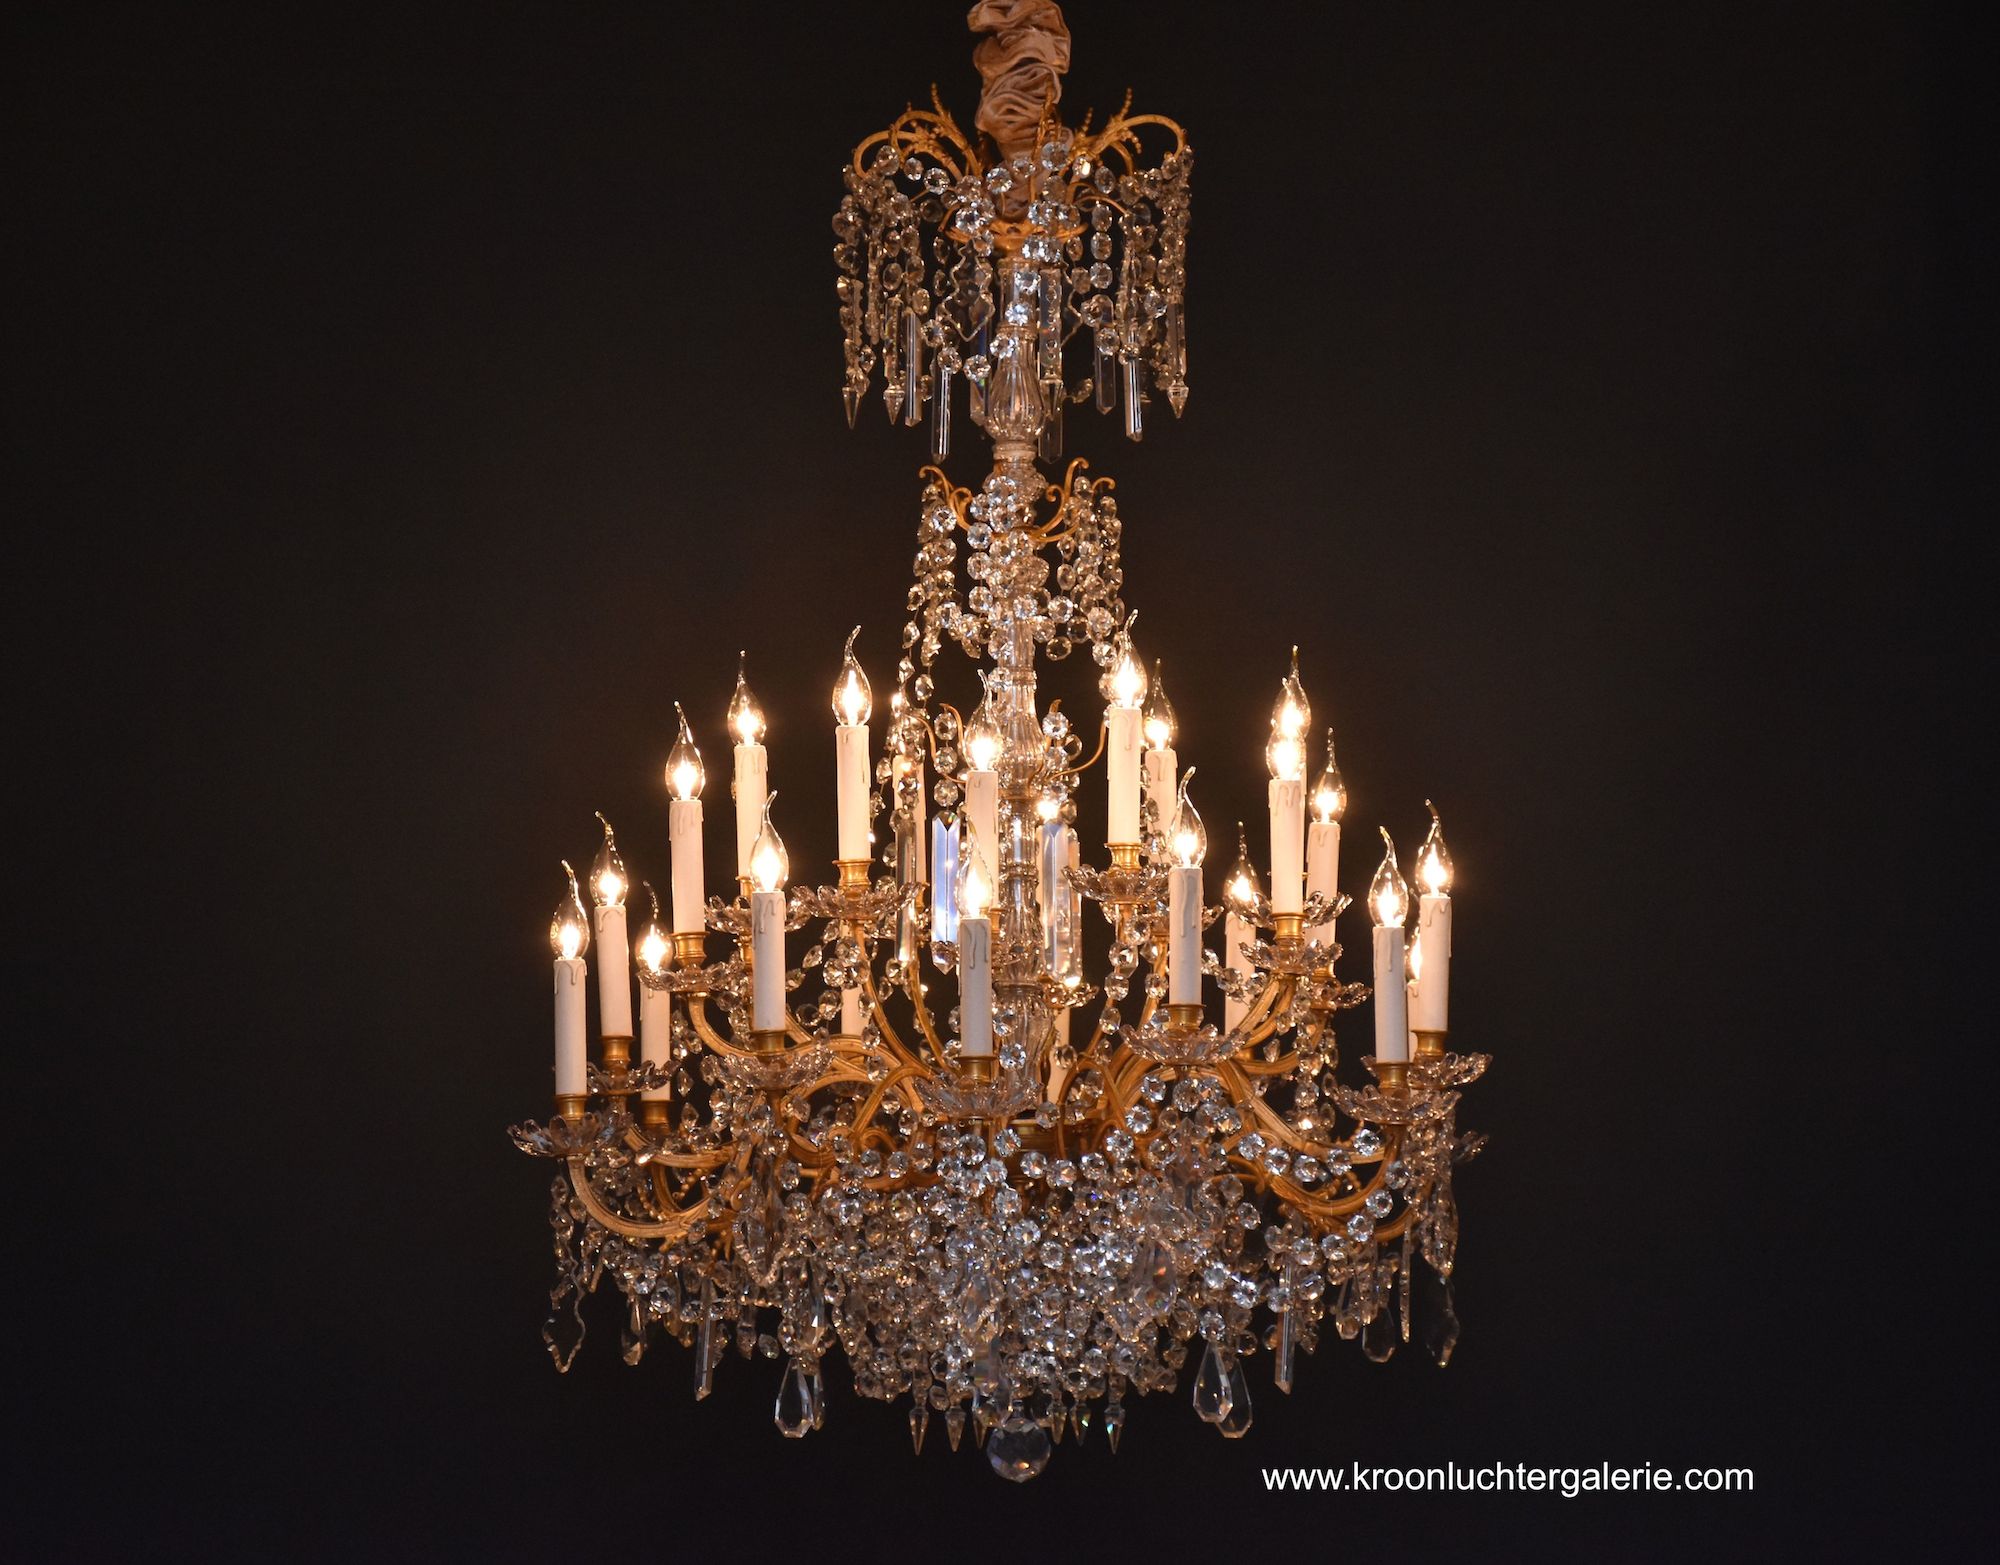 Large French Baccarat chandelier in the style of Louis XVI